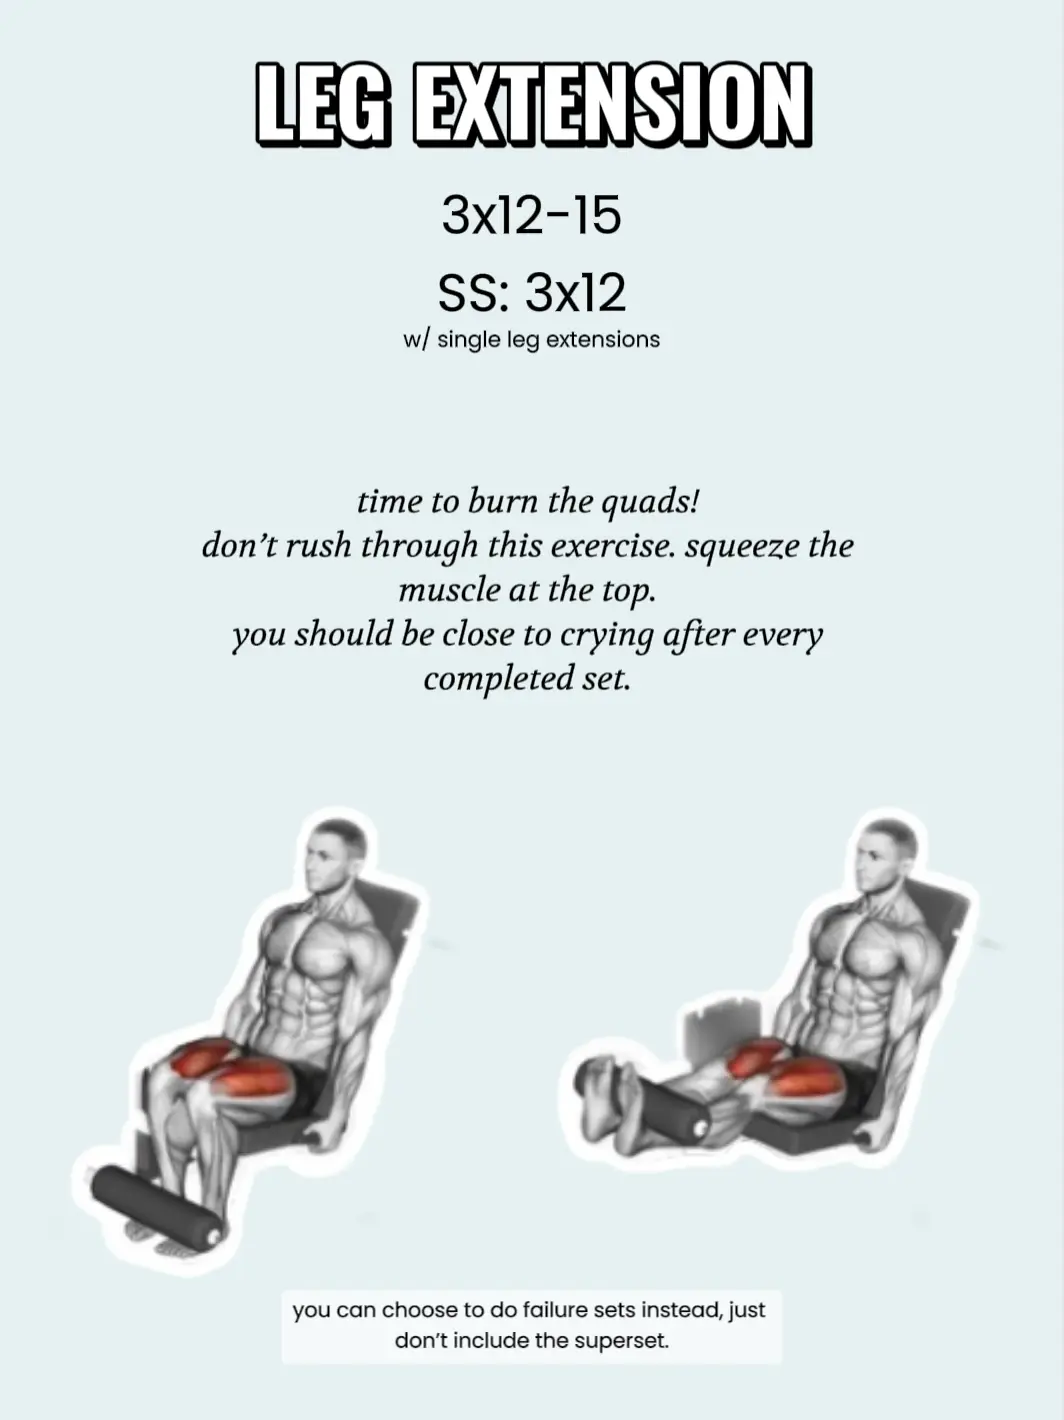 Isolate those Quads from home! ⬇️ If you don't have a leg